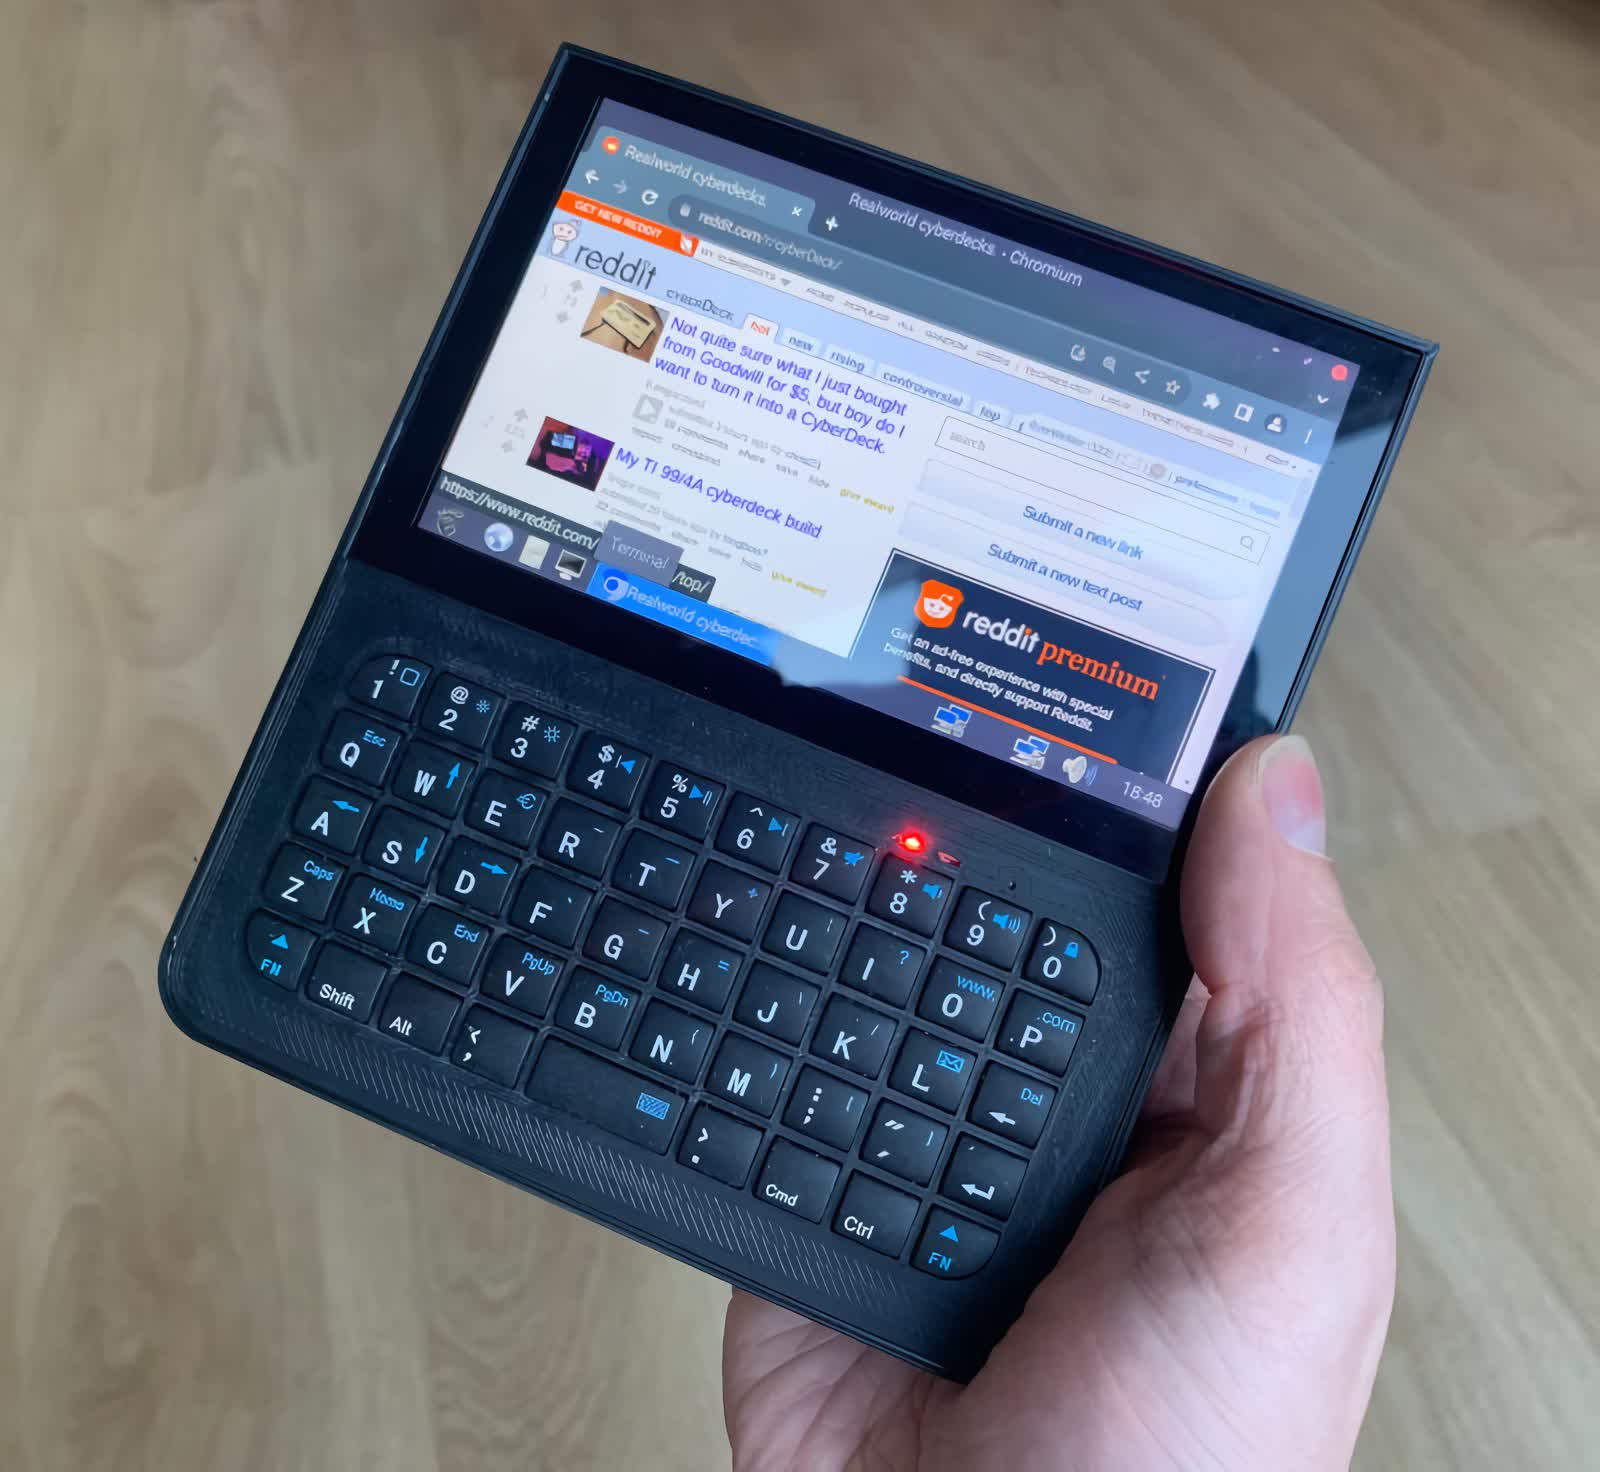 Raspberry-Pi-powered Decktility is a modern take on the classic pocket PC